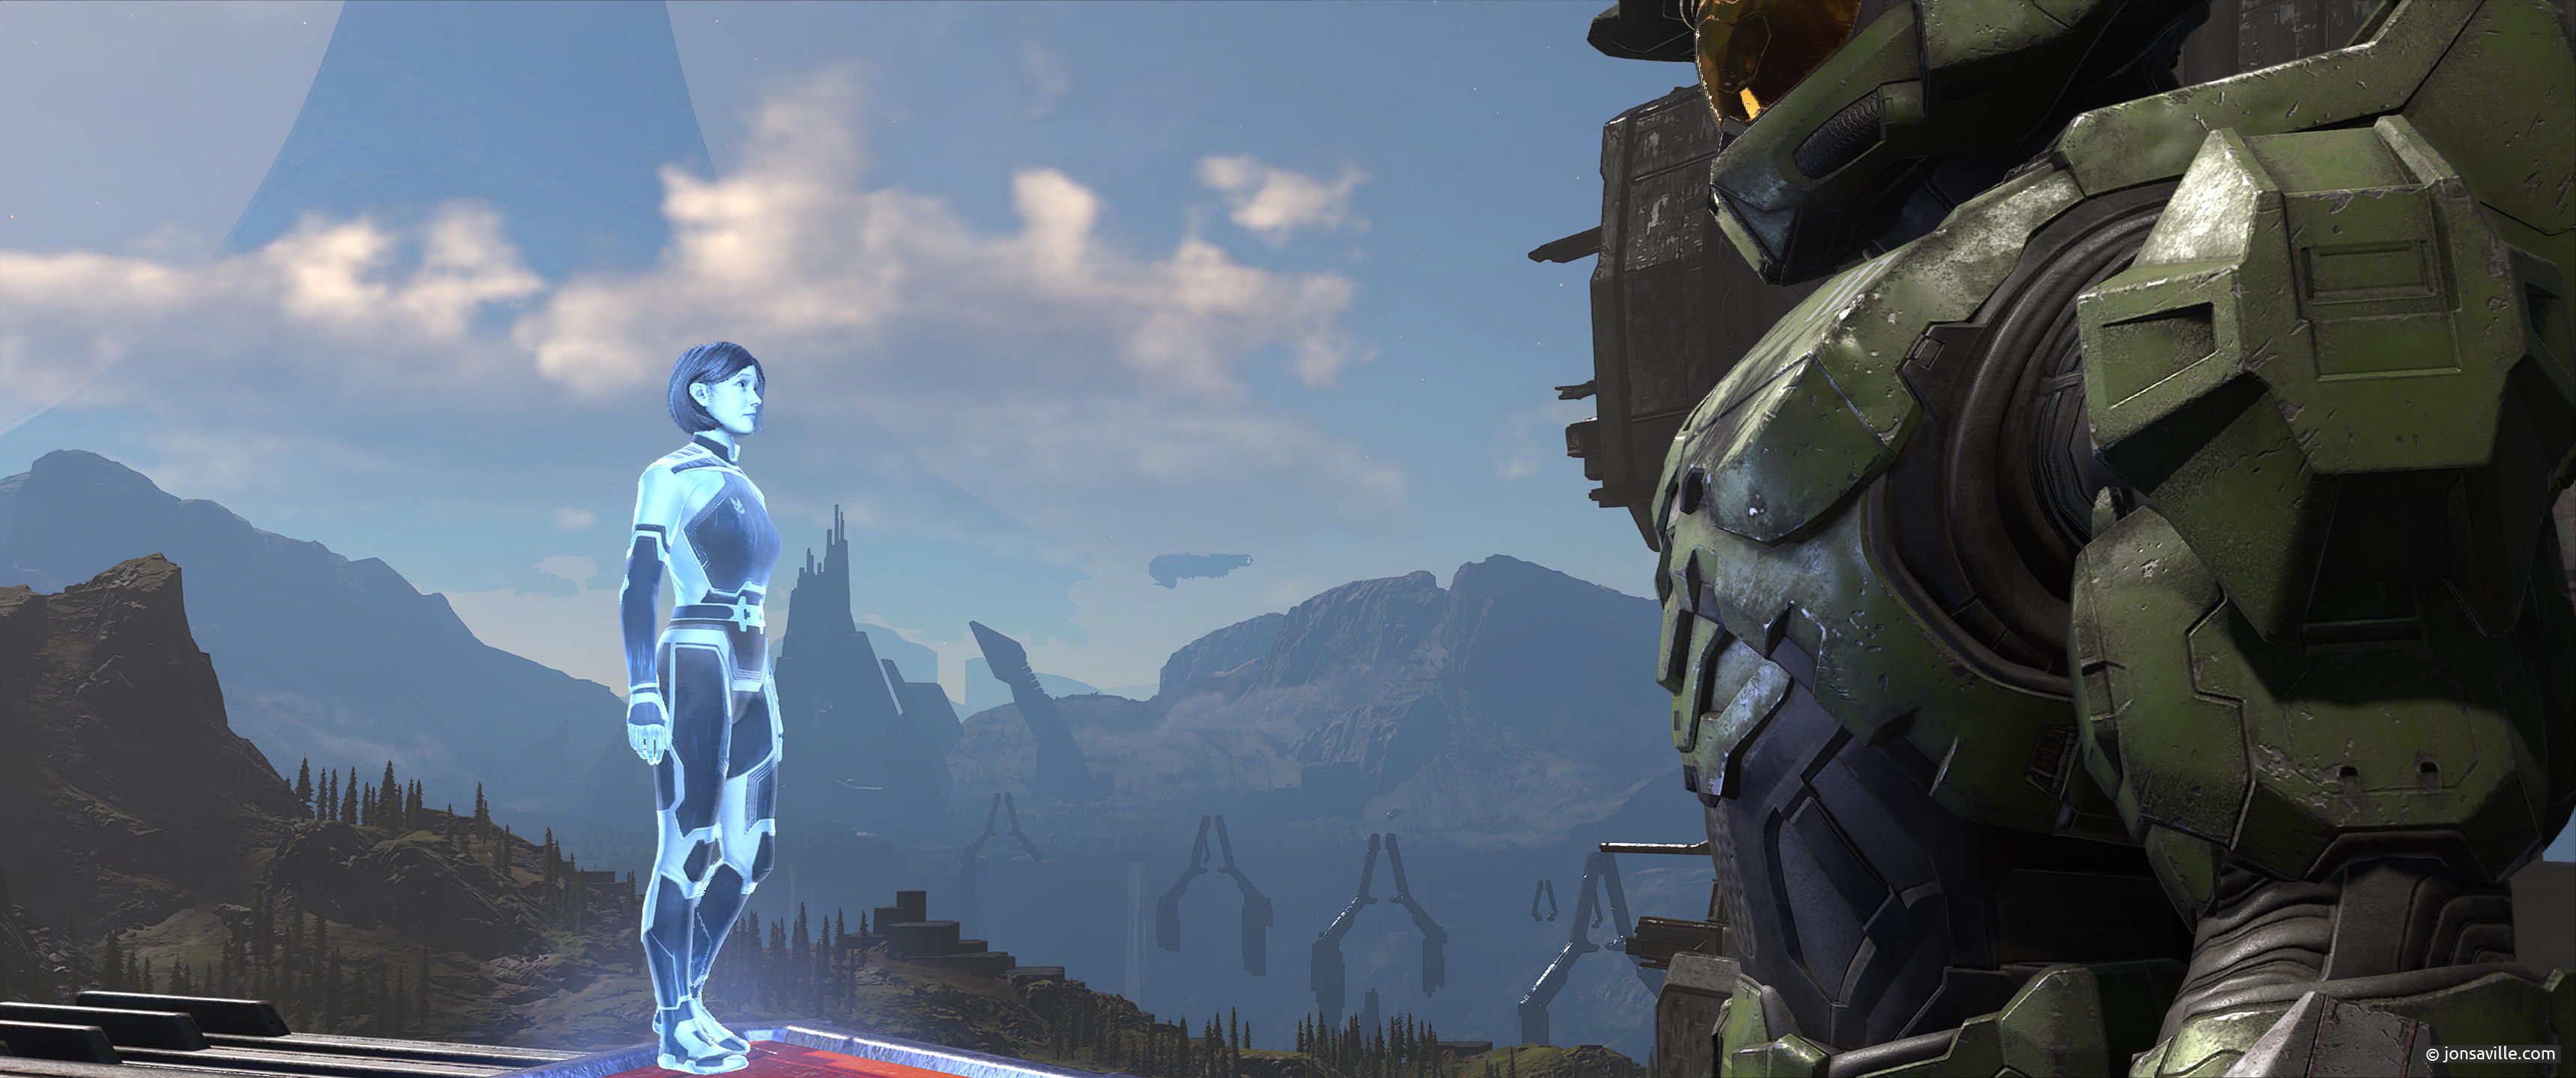 Halo Infinite - Master Chief and the Weapon stand on Zeta Halo